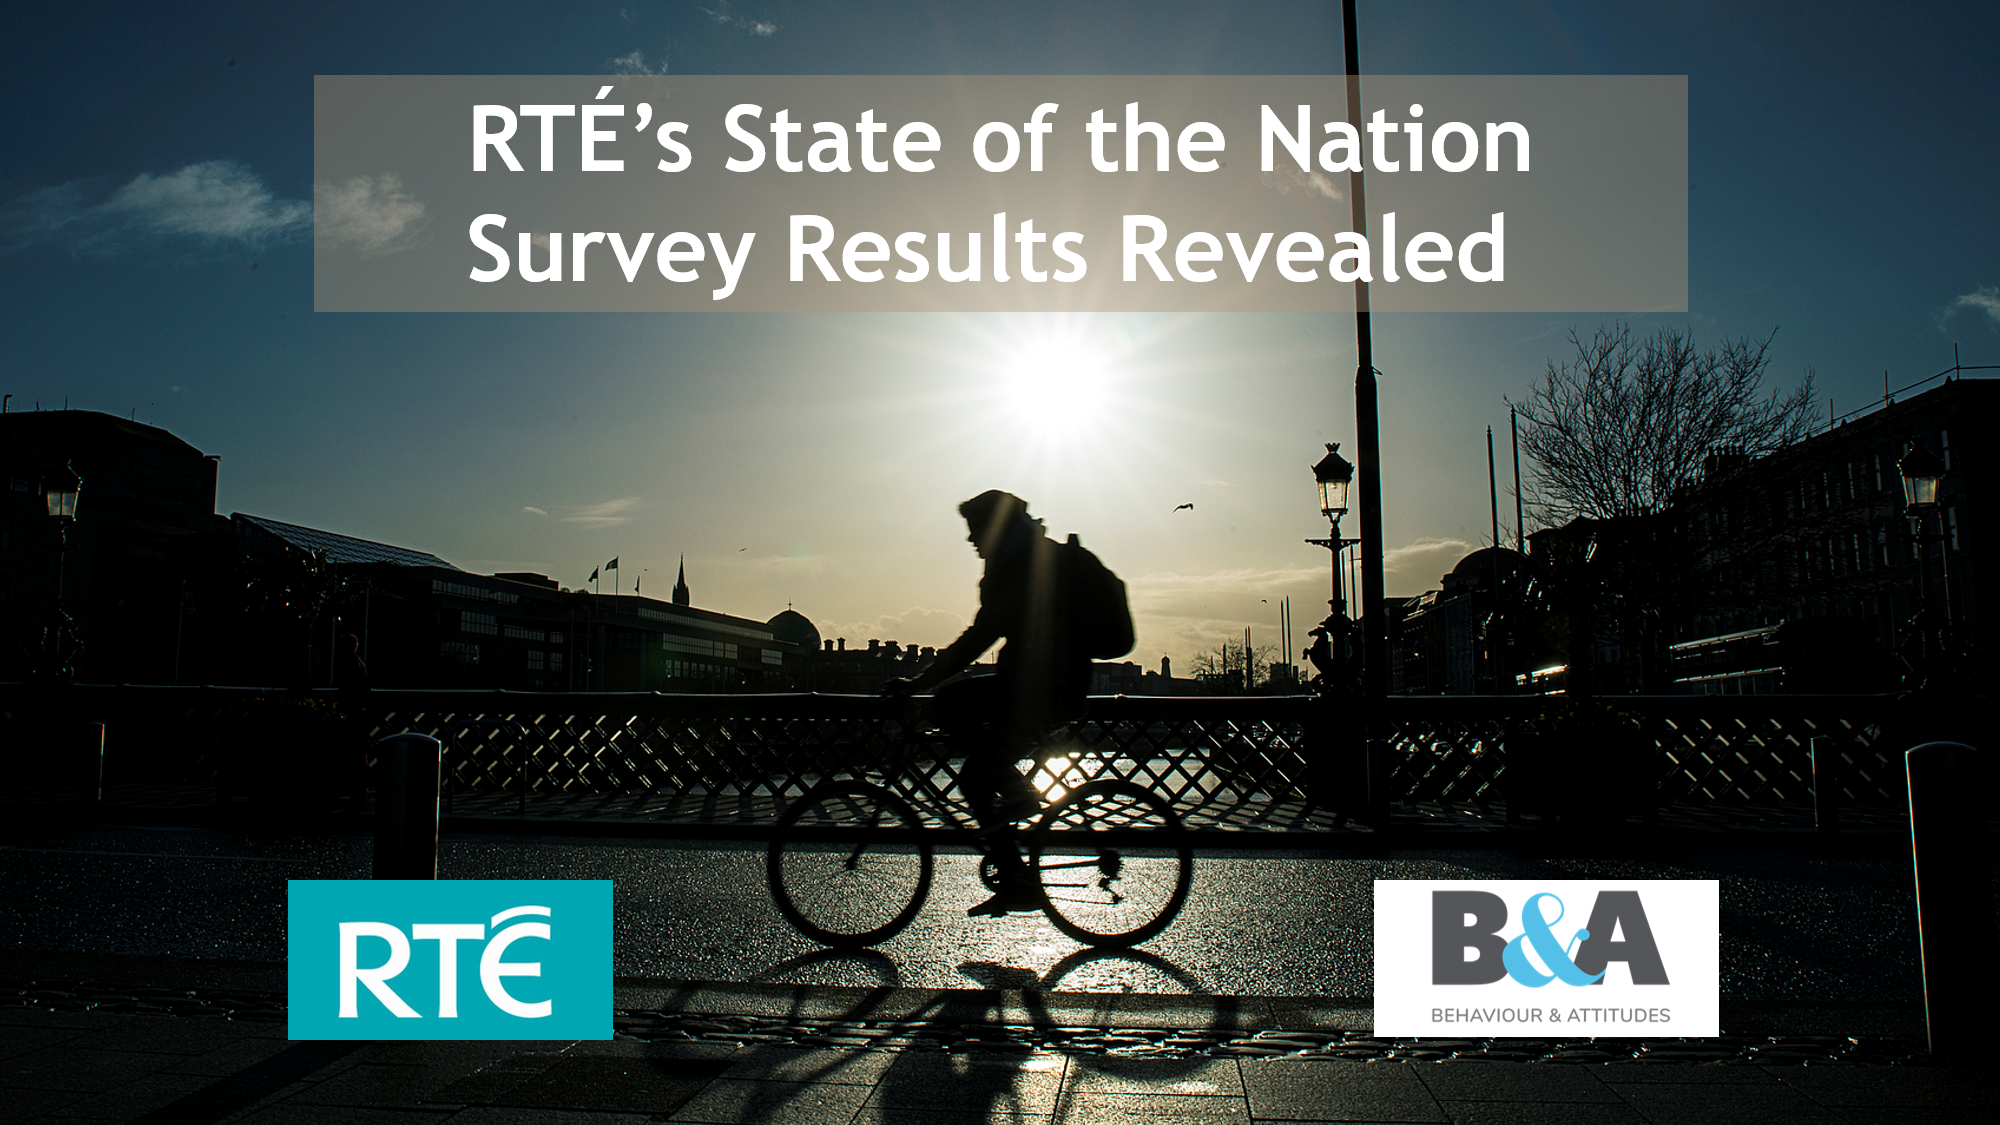 RTÉ’s State of the Nation Survey Results Revealed